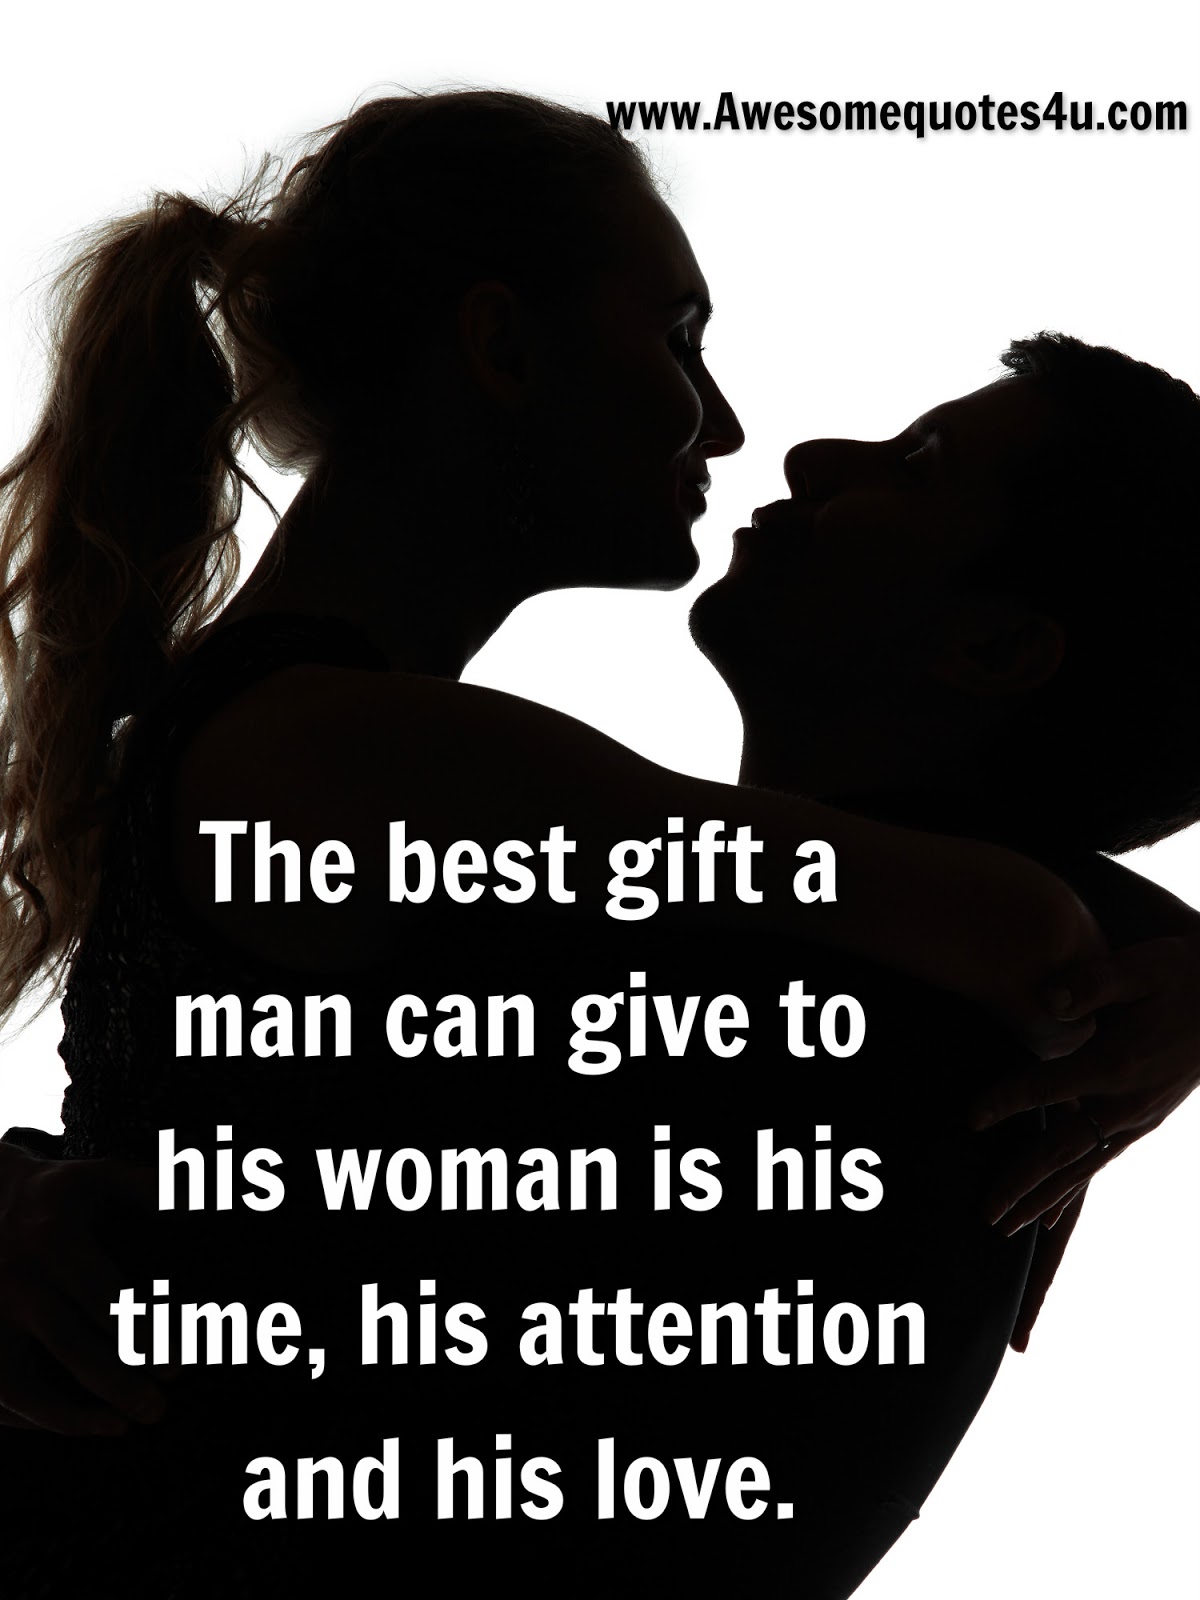 Awesome Quotes: The best Gift a man can give to his woman